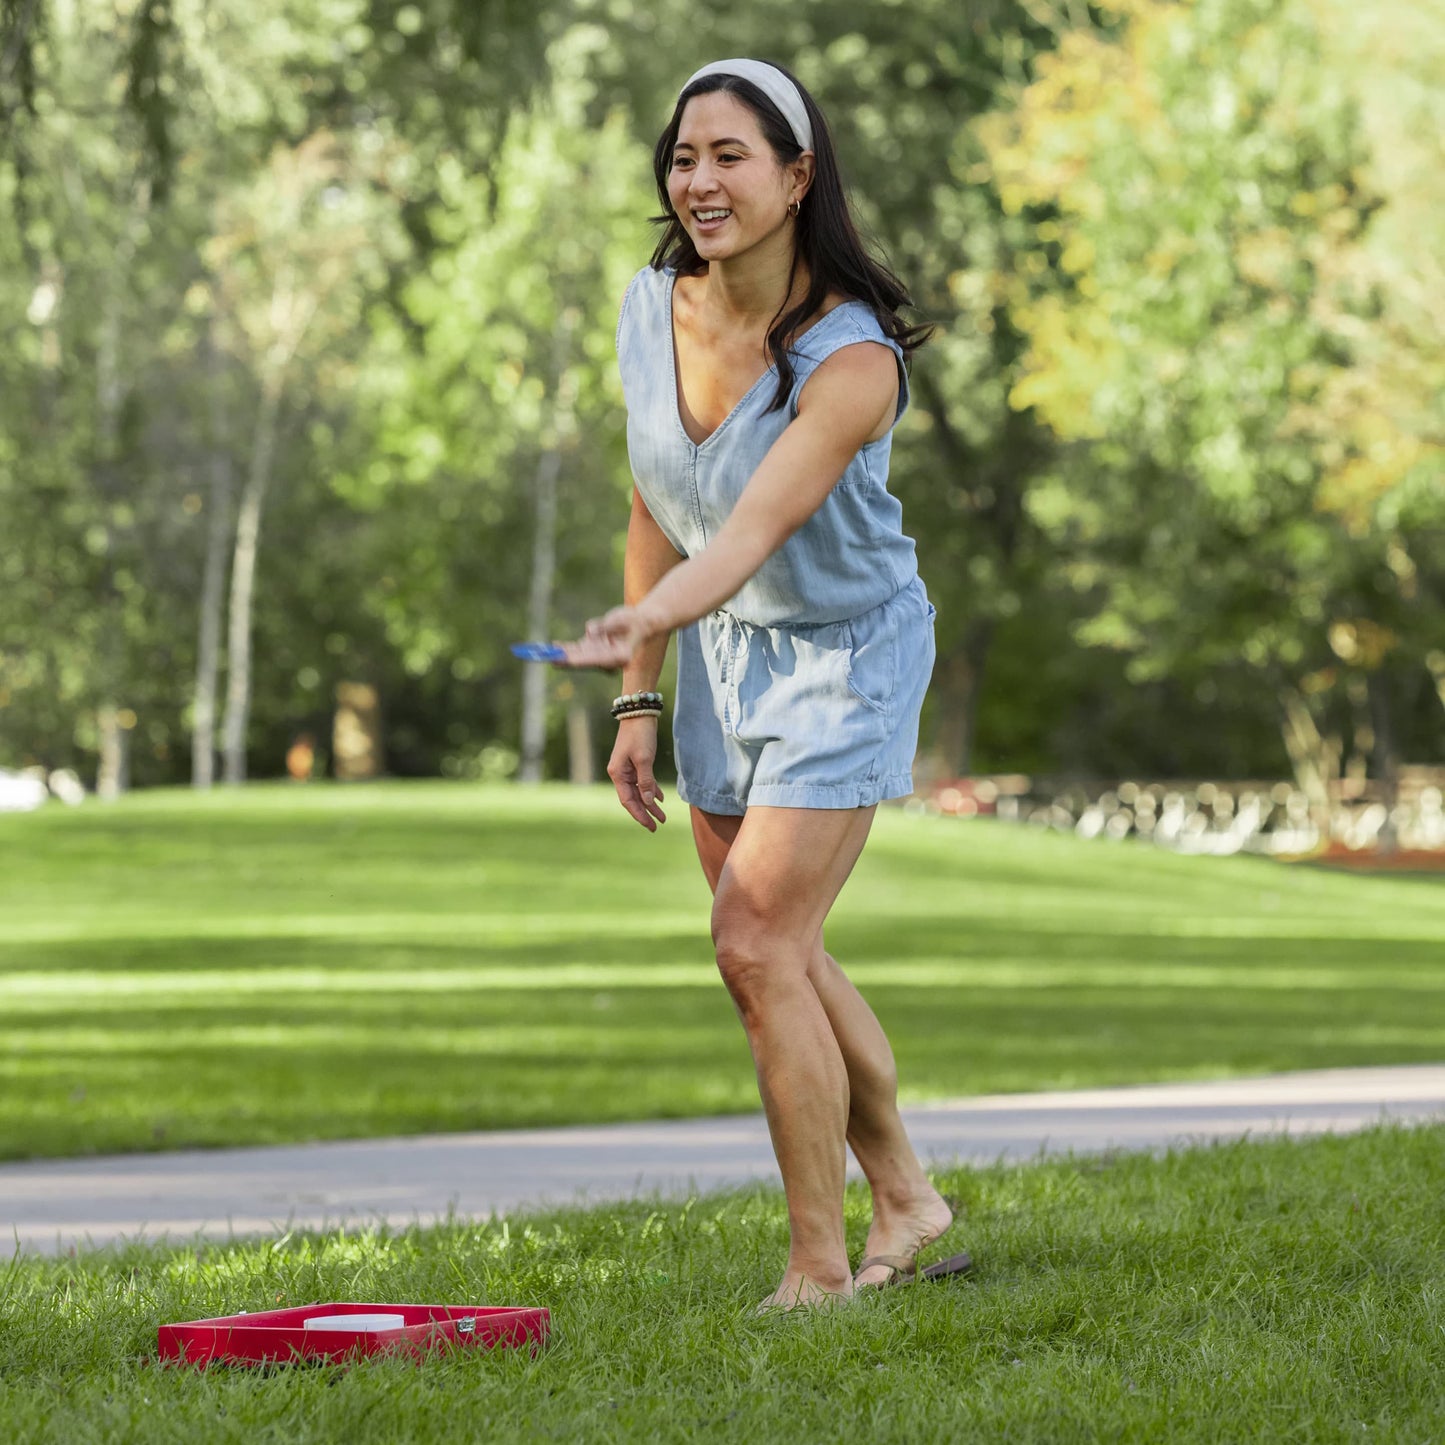 Sportcraft Wooden Washer Toss Game - Lifestyle Image - Woman Playing Game